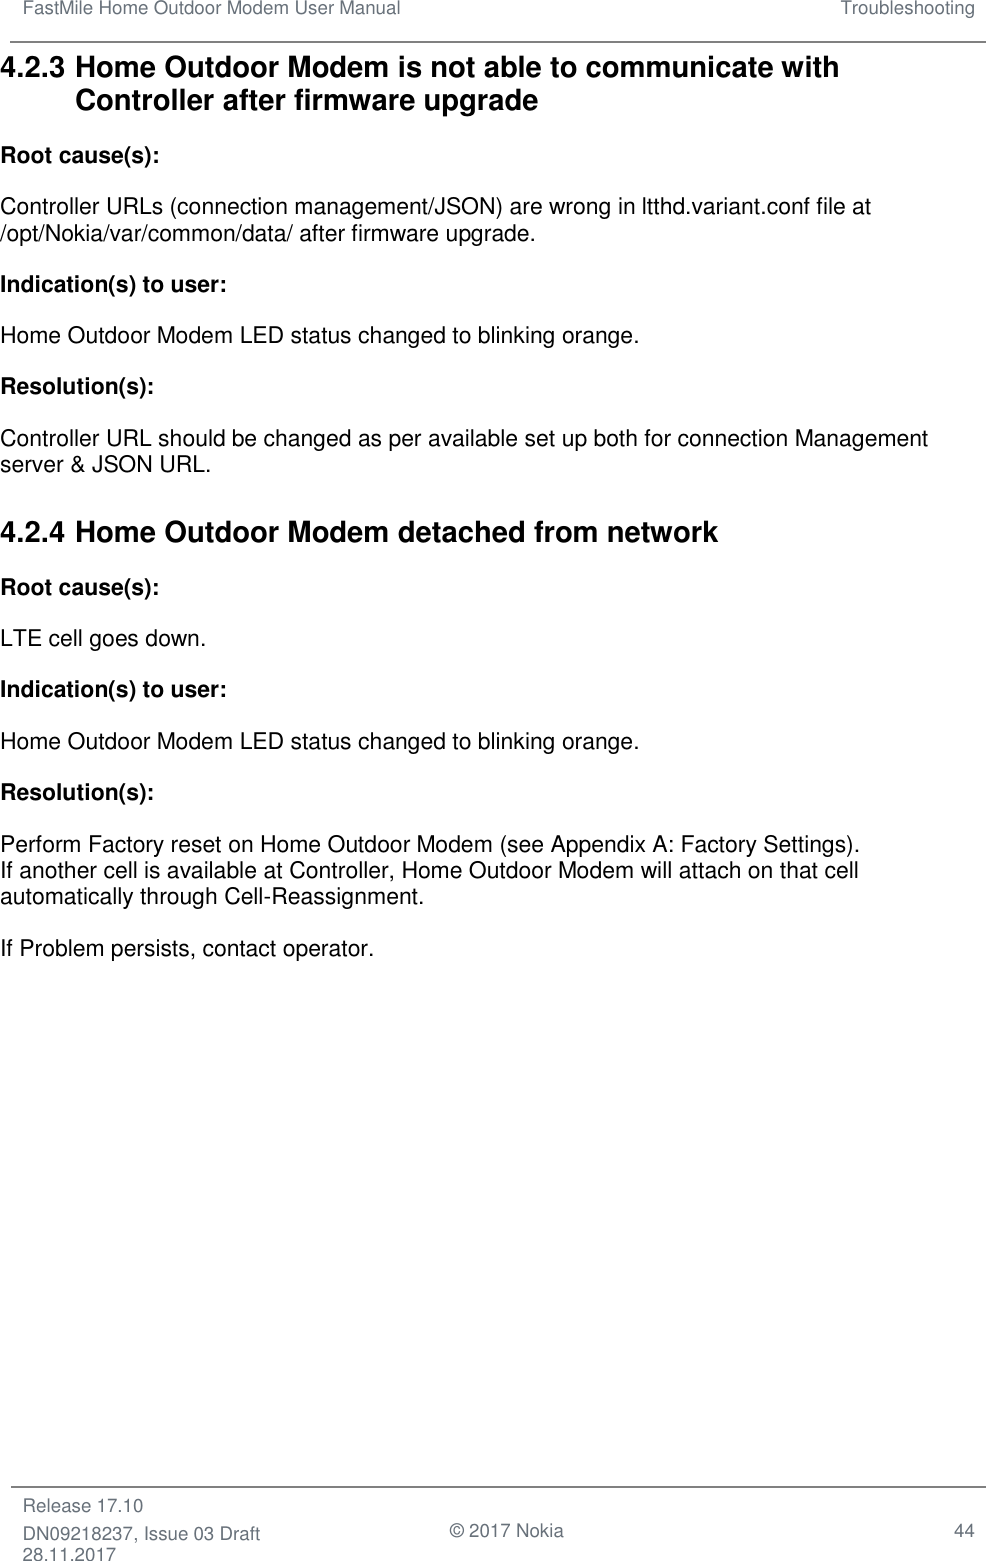 FastMile Home Outdoor Modem User Manual Troubleshooting  Release 17.10 DN09218237, Issue 03 Draft 28.11.2017                                © 2017 Nokia 44  4.2.3 Home Outdoor Modem is not able to communicate with Controller after firmware upgrade Root cause(s): Controller URLs (connection management/JSON) are wrong in ltthd.variant.conf file at /opt/Nokia/var/common/data/ after firmware upgrade.  Indication(s) to user: Home Outdoor Modem LED status changed to blinking orange. Resolution(s): Controller URL should be changed as per available set up both for connection Management server &amp; JSON URL. 4.2.4 Home Outdoor Modem detached from network Root cause(s): LTE cell goes down. Indication(s) to user: Home Outdoor Modem LED status changed to blinking orange. Resolution(s): Perform Factory reset on Home Outdoor Modem (see Appendix A: Factory Settings). If another cell is available at Controller, Home Outdoor Modem will attach on that cell automatically through Cell-Reassignment. If Problem persists, contact operator.  